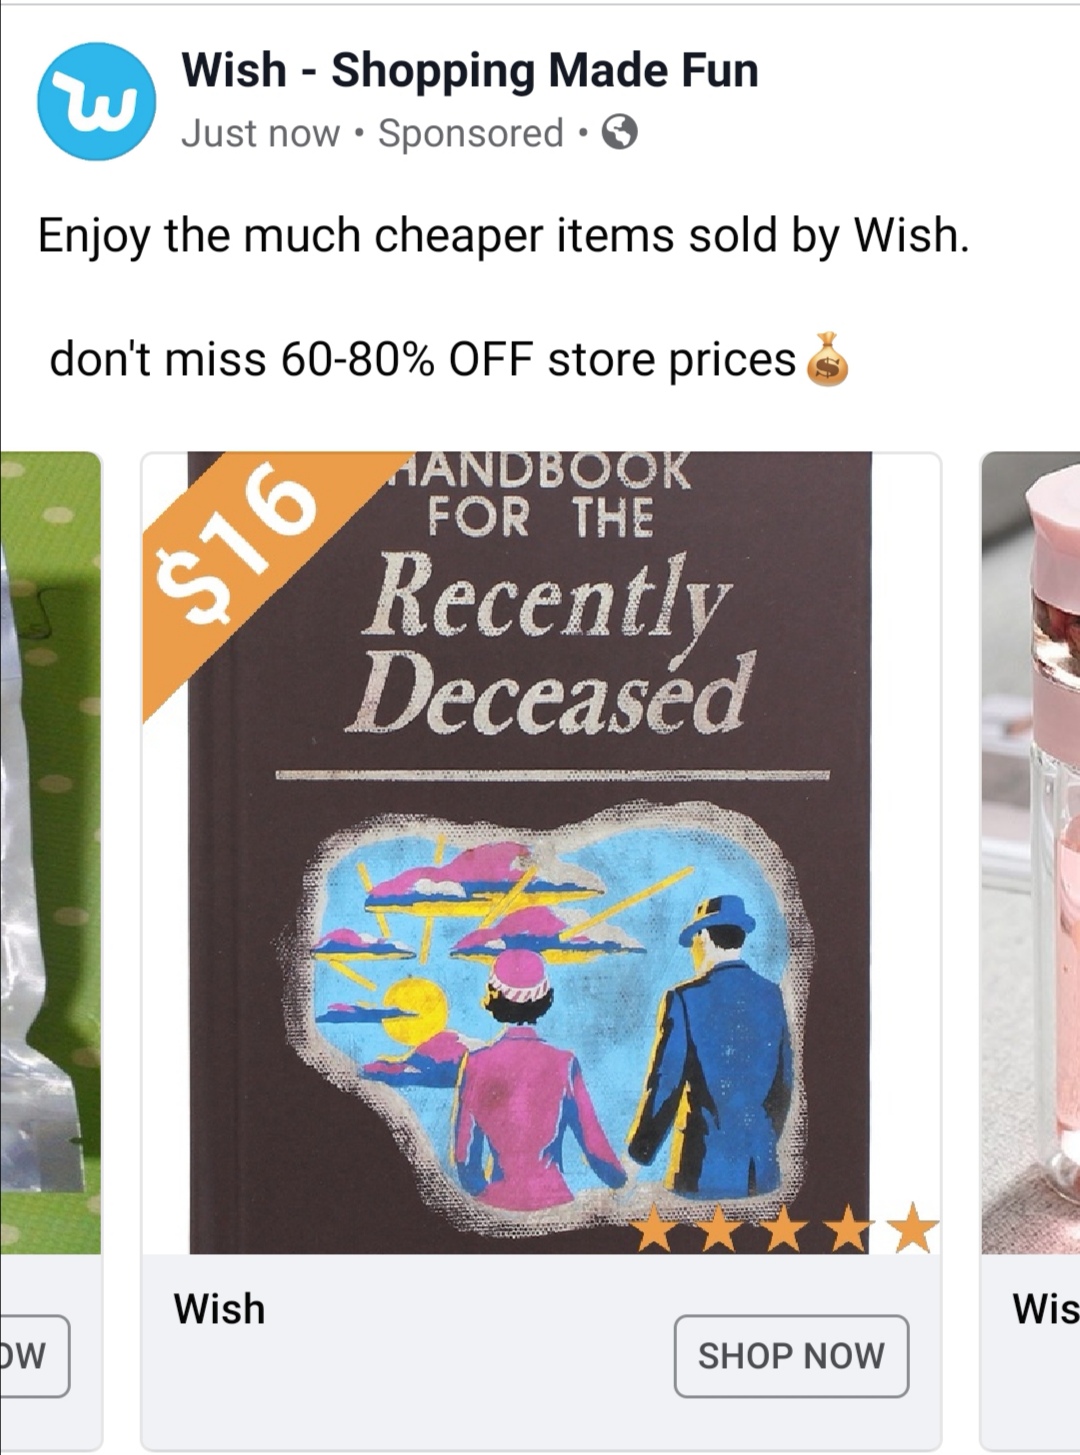 beetlejuice handbook - Wish Shopping Made Fun Just now Sponsored Enjoy the much cheaper items sold by Wish. don't miss 6080% Off store prices $ Handbook For The S16 Recently Deceased Wish Wis Dw Shop Now